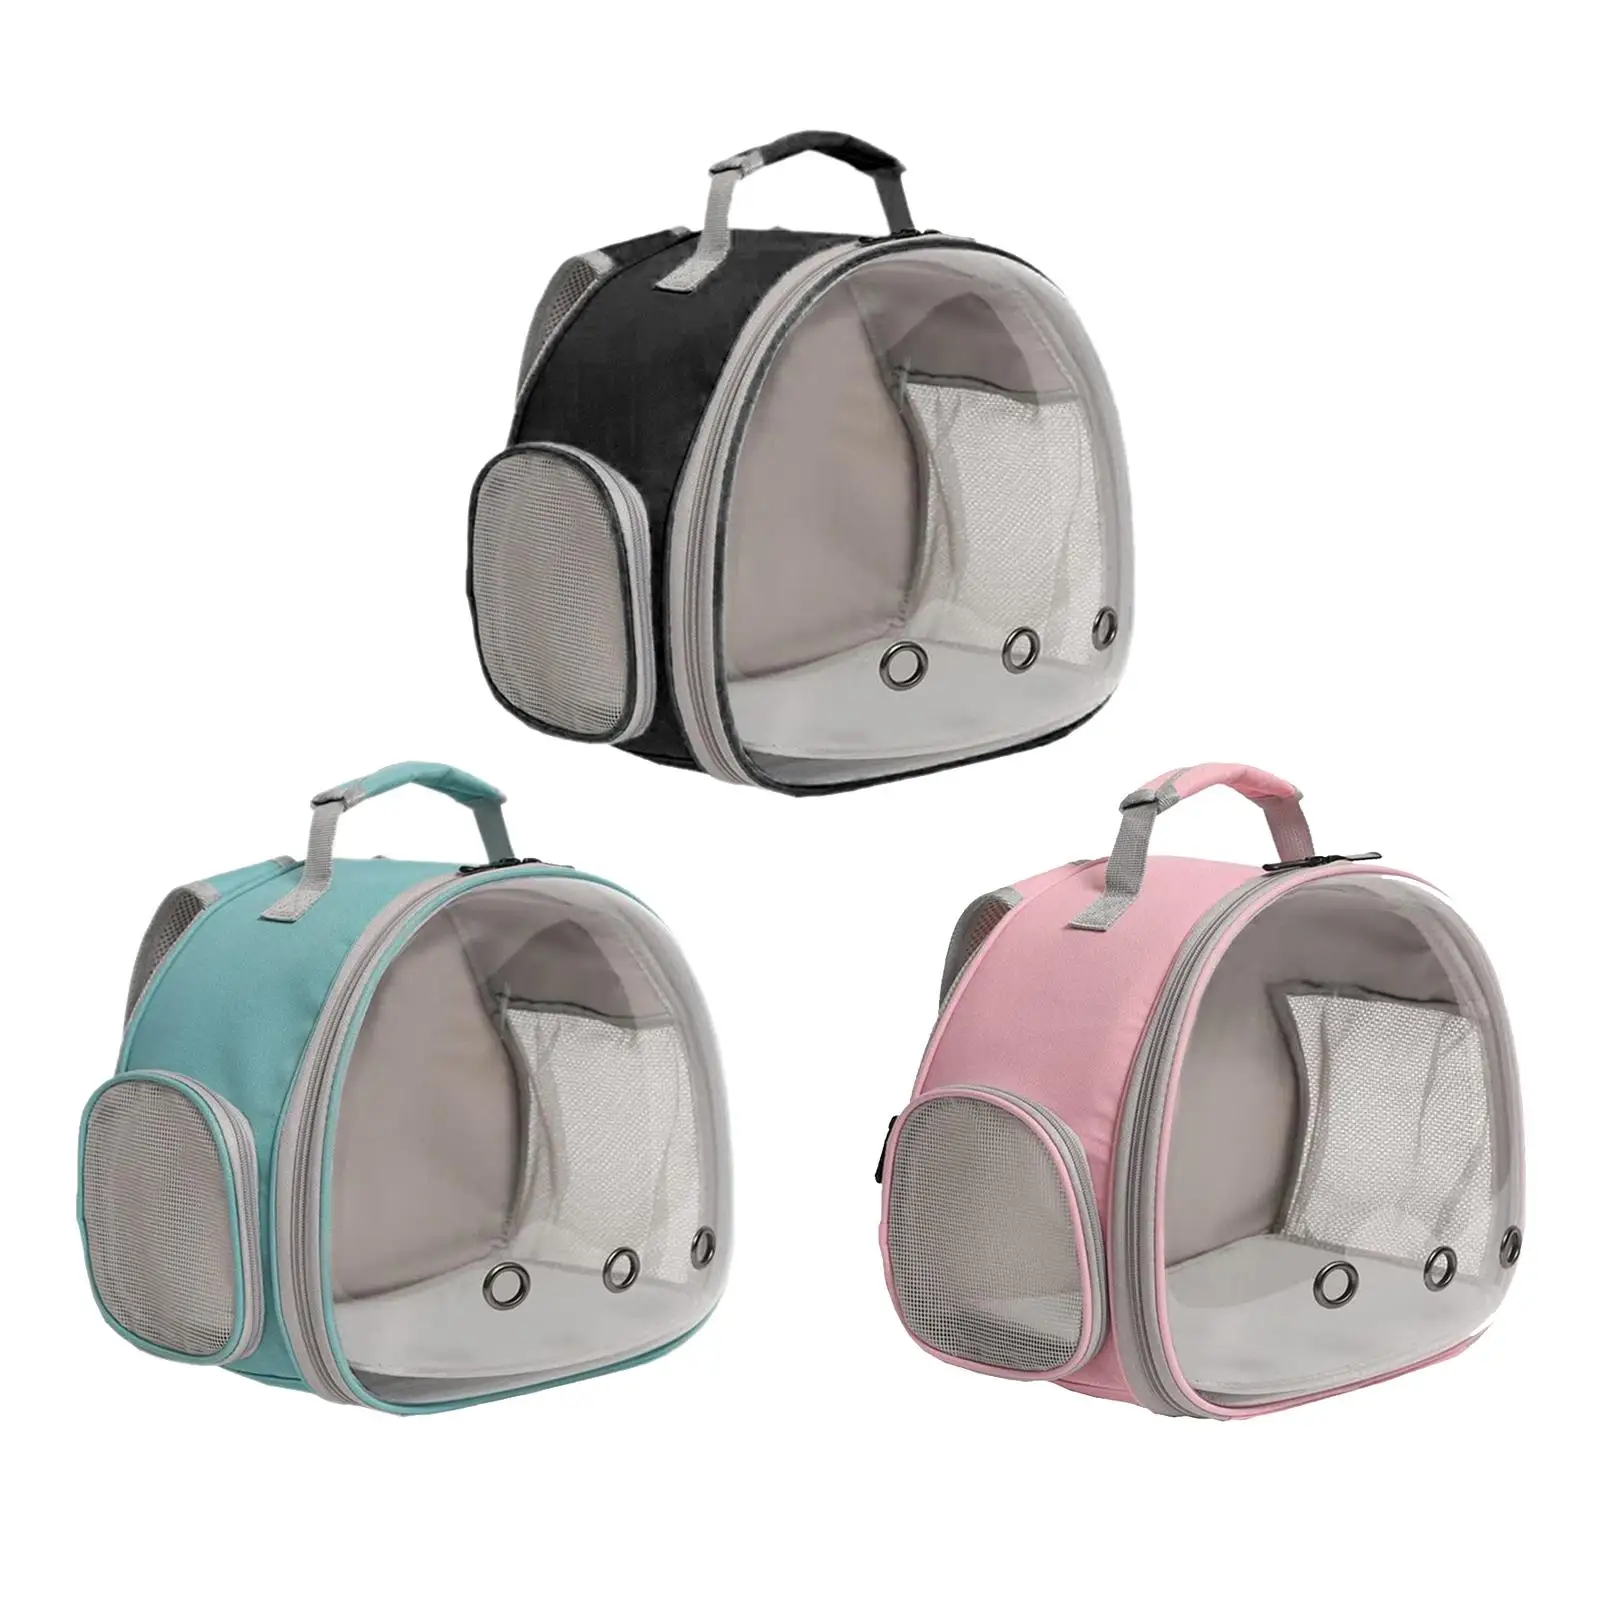 Pet Hamster Carrier Backpack Breathable Clear Window Multifunction Pouch Pet Travel Bag Carrying Bag for Hedgehog Parrot Bird